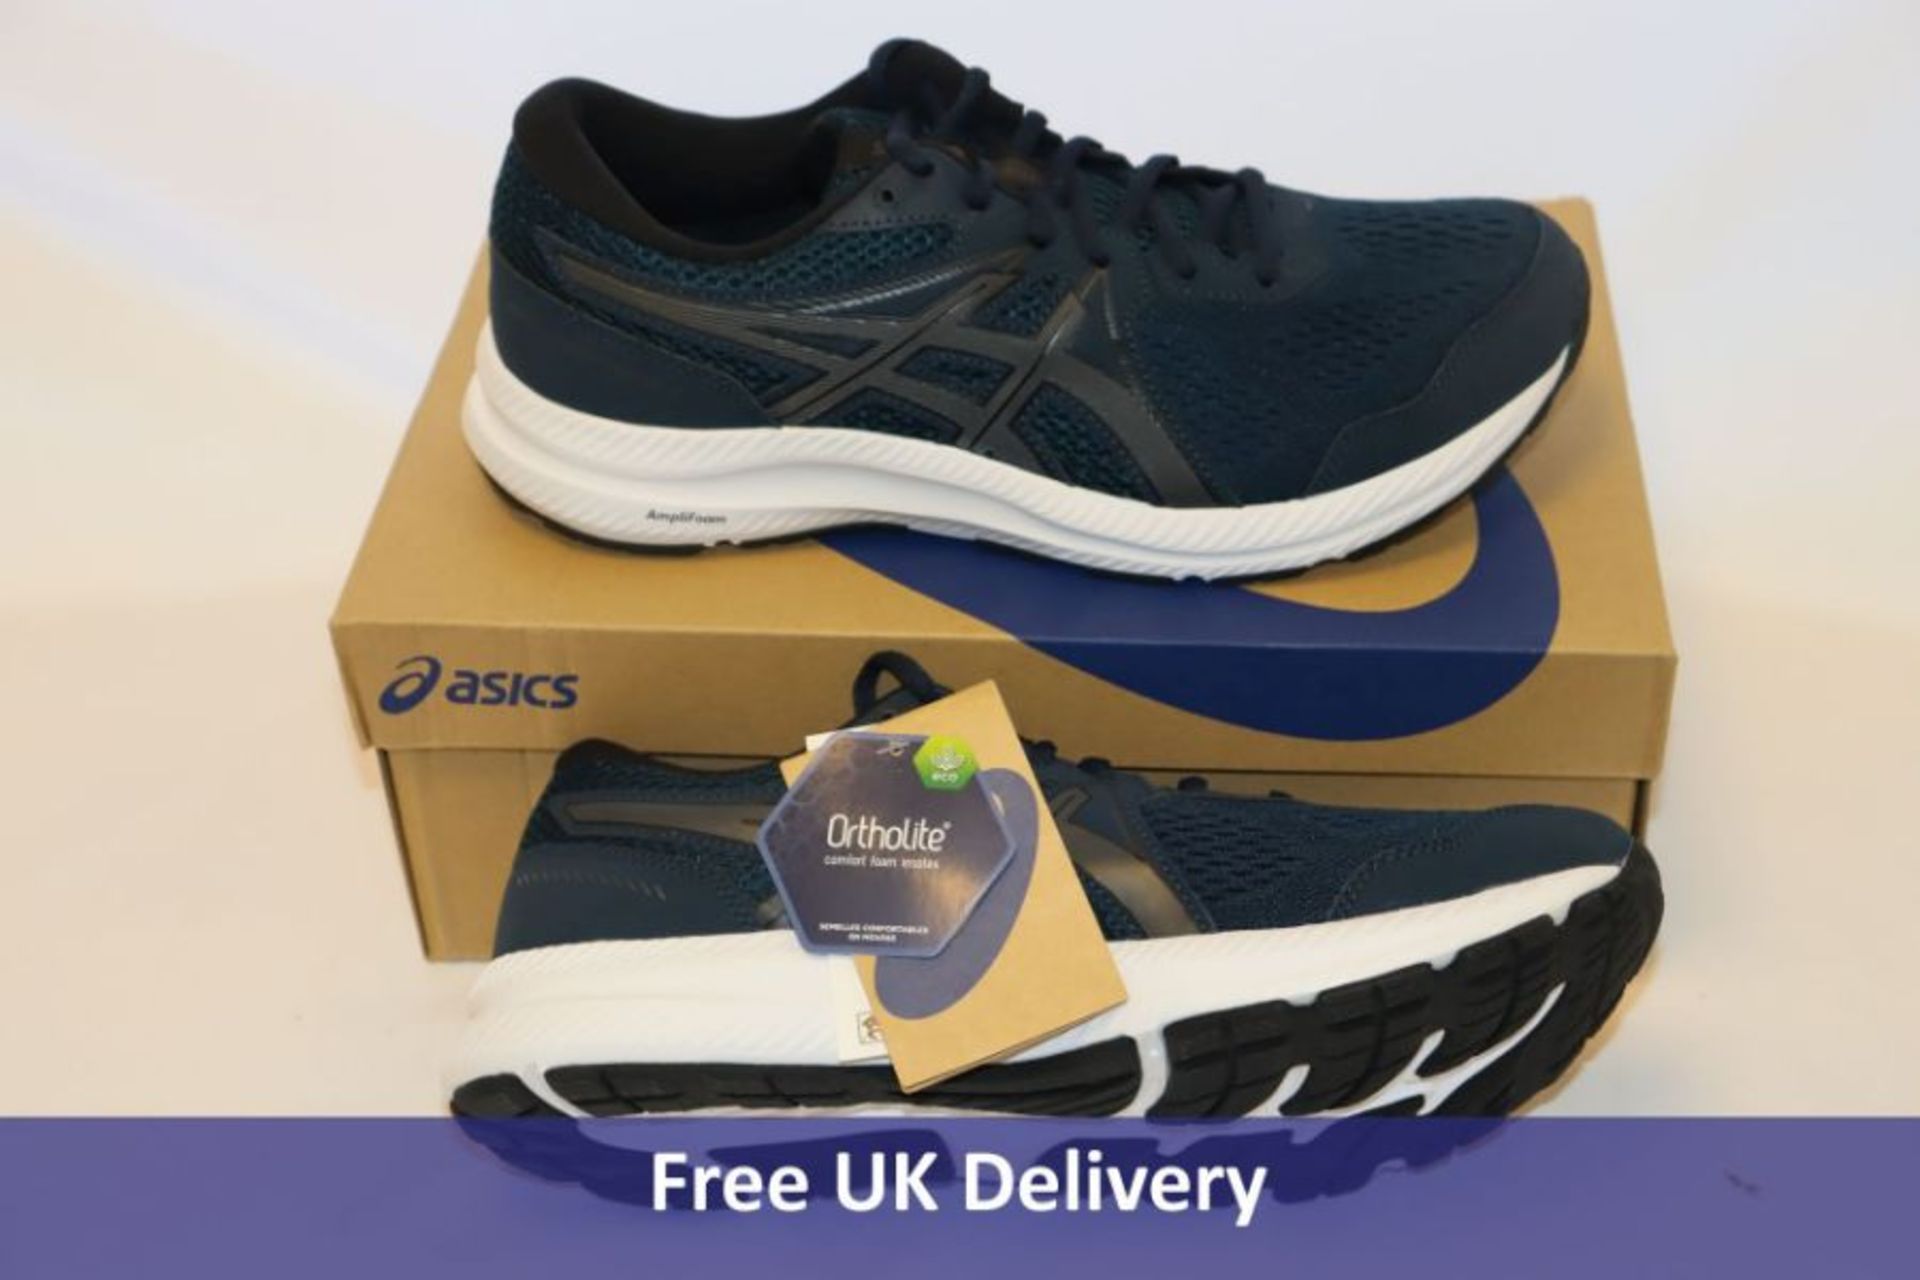 Four Pairs of Asics GEL-Contend 7 Running Shoes, French Blue/Gunmetal, to include 1x UK 6, 1x UK 8,